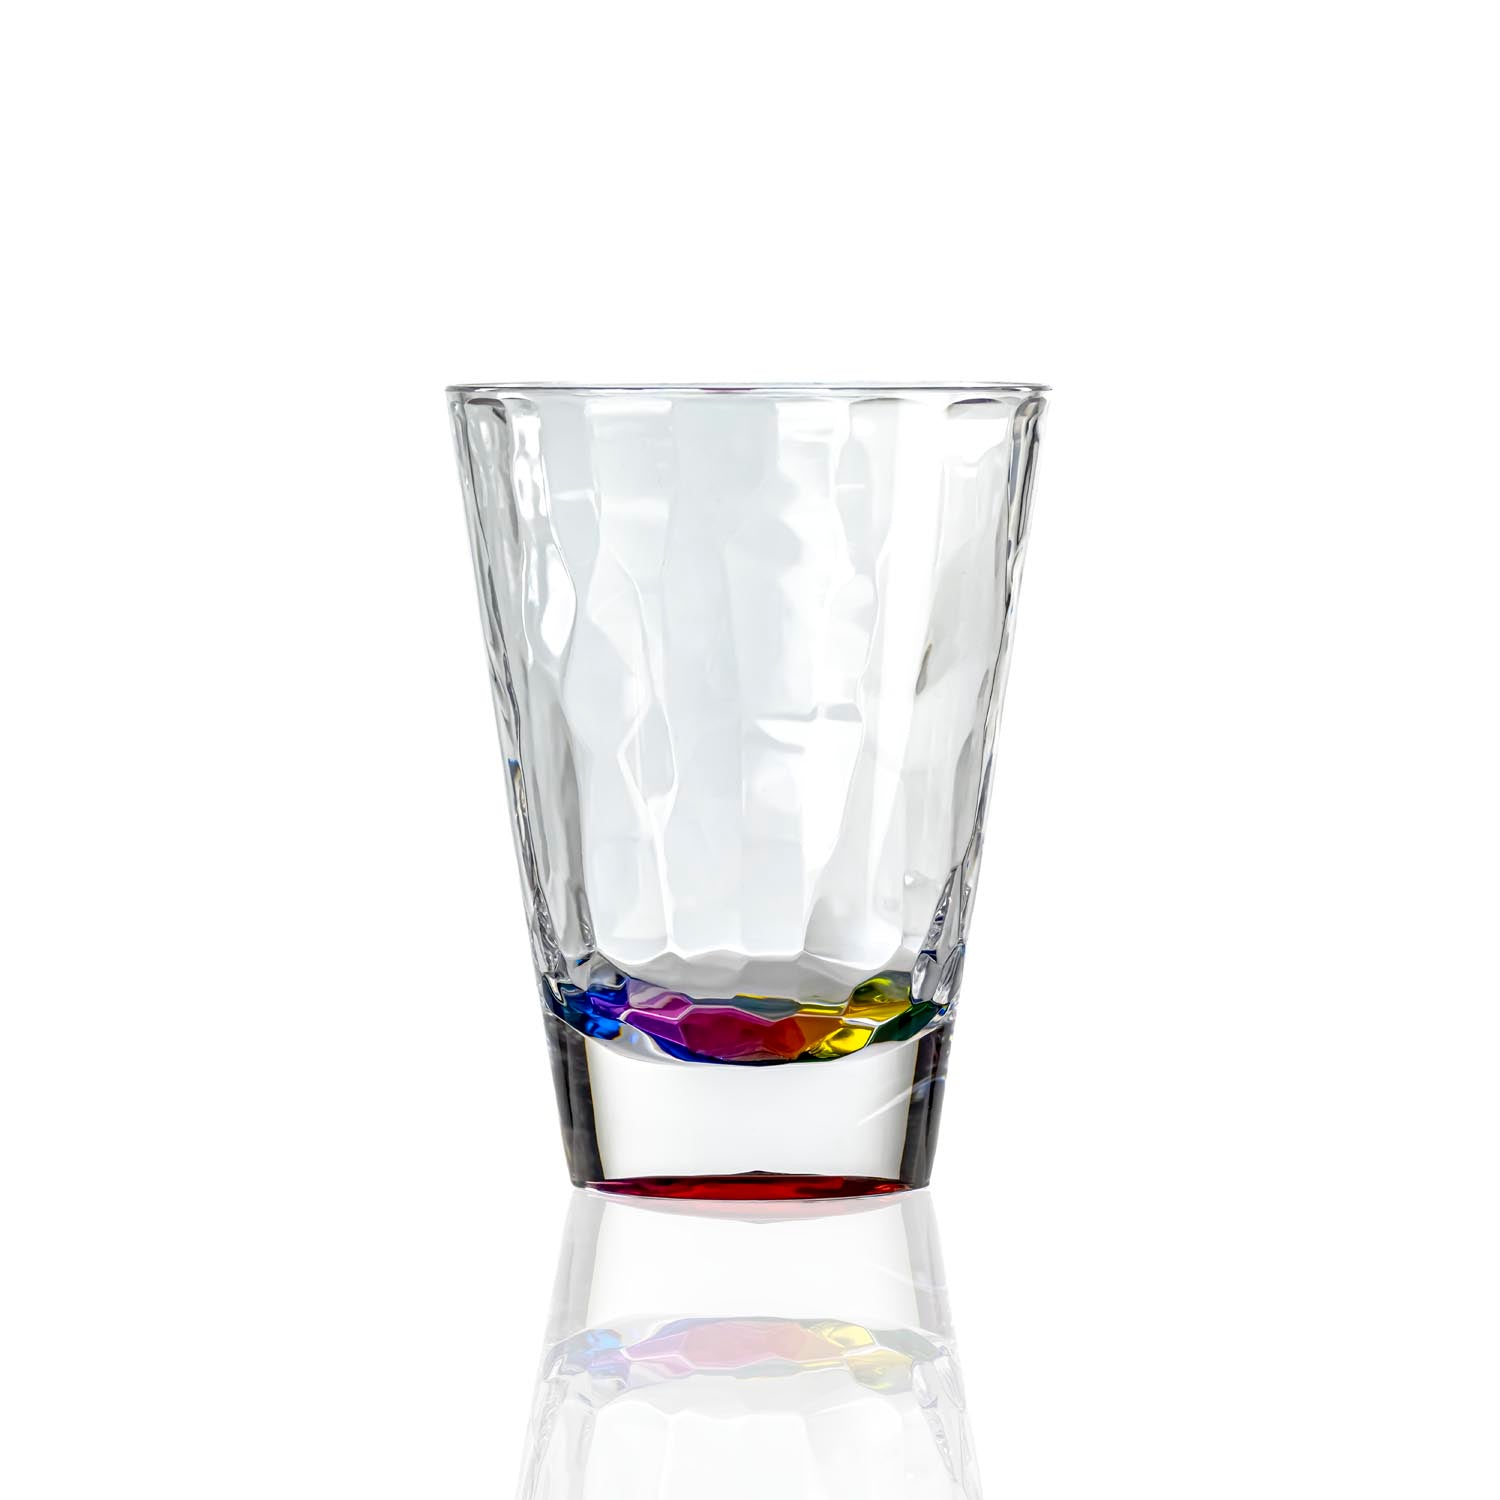 14-ounce rainbow acrylic tumbler glass from the Merritt Designs Cascade collection. Front view on white background